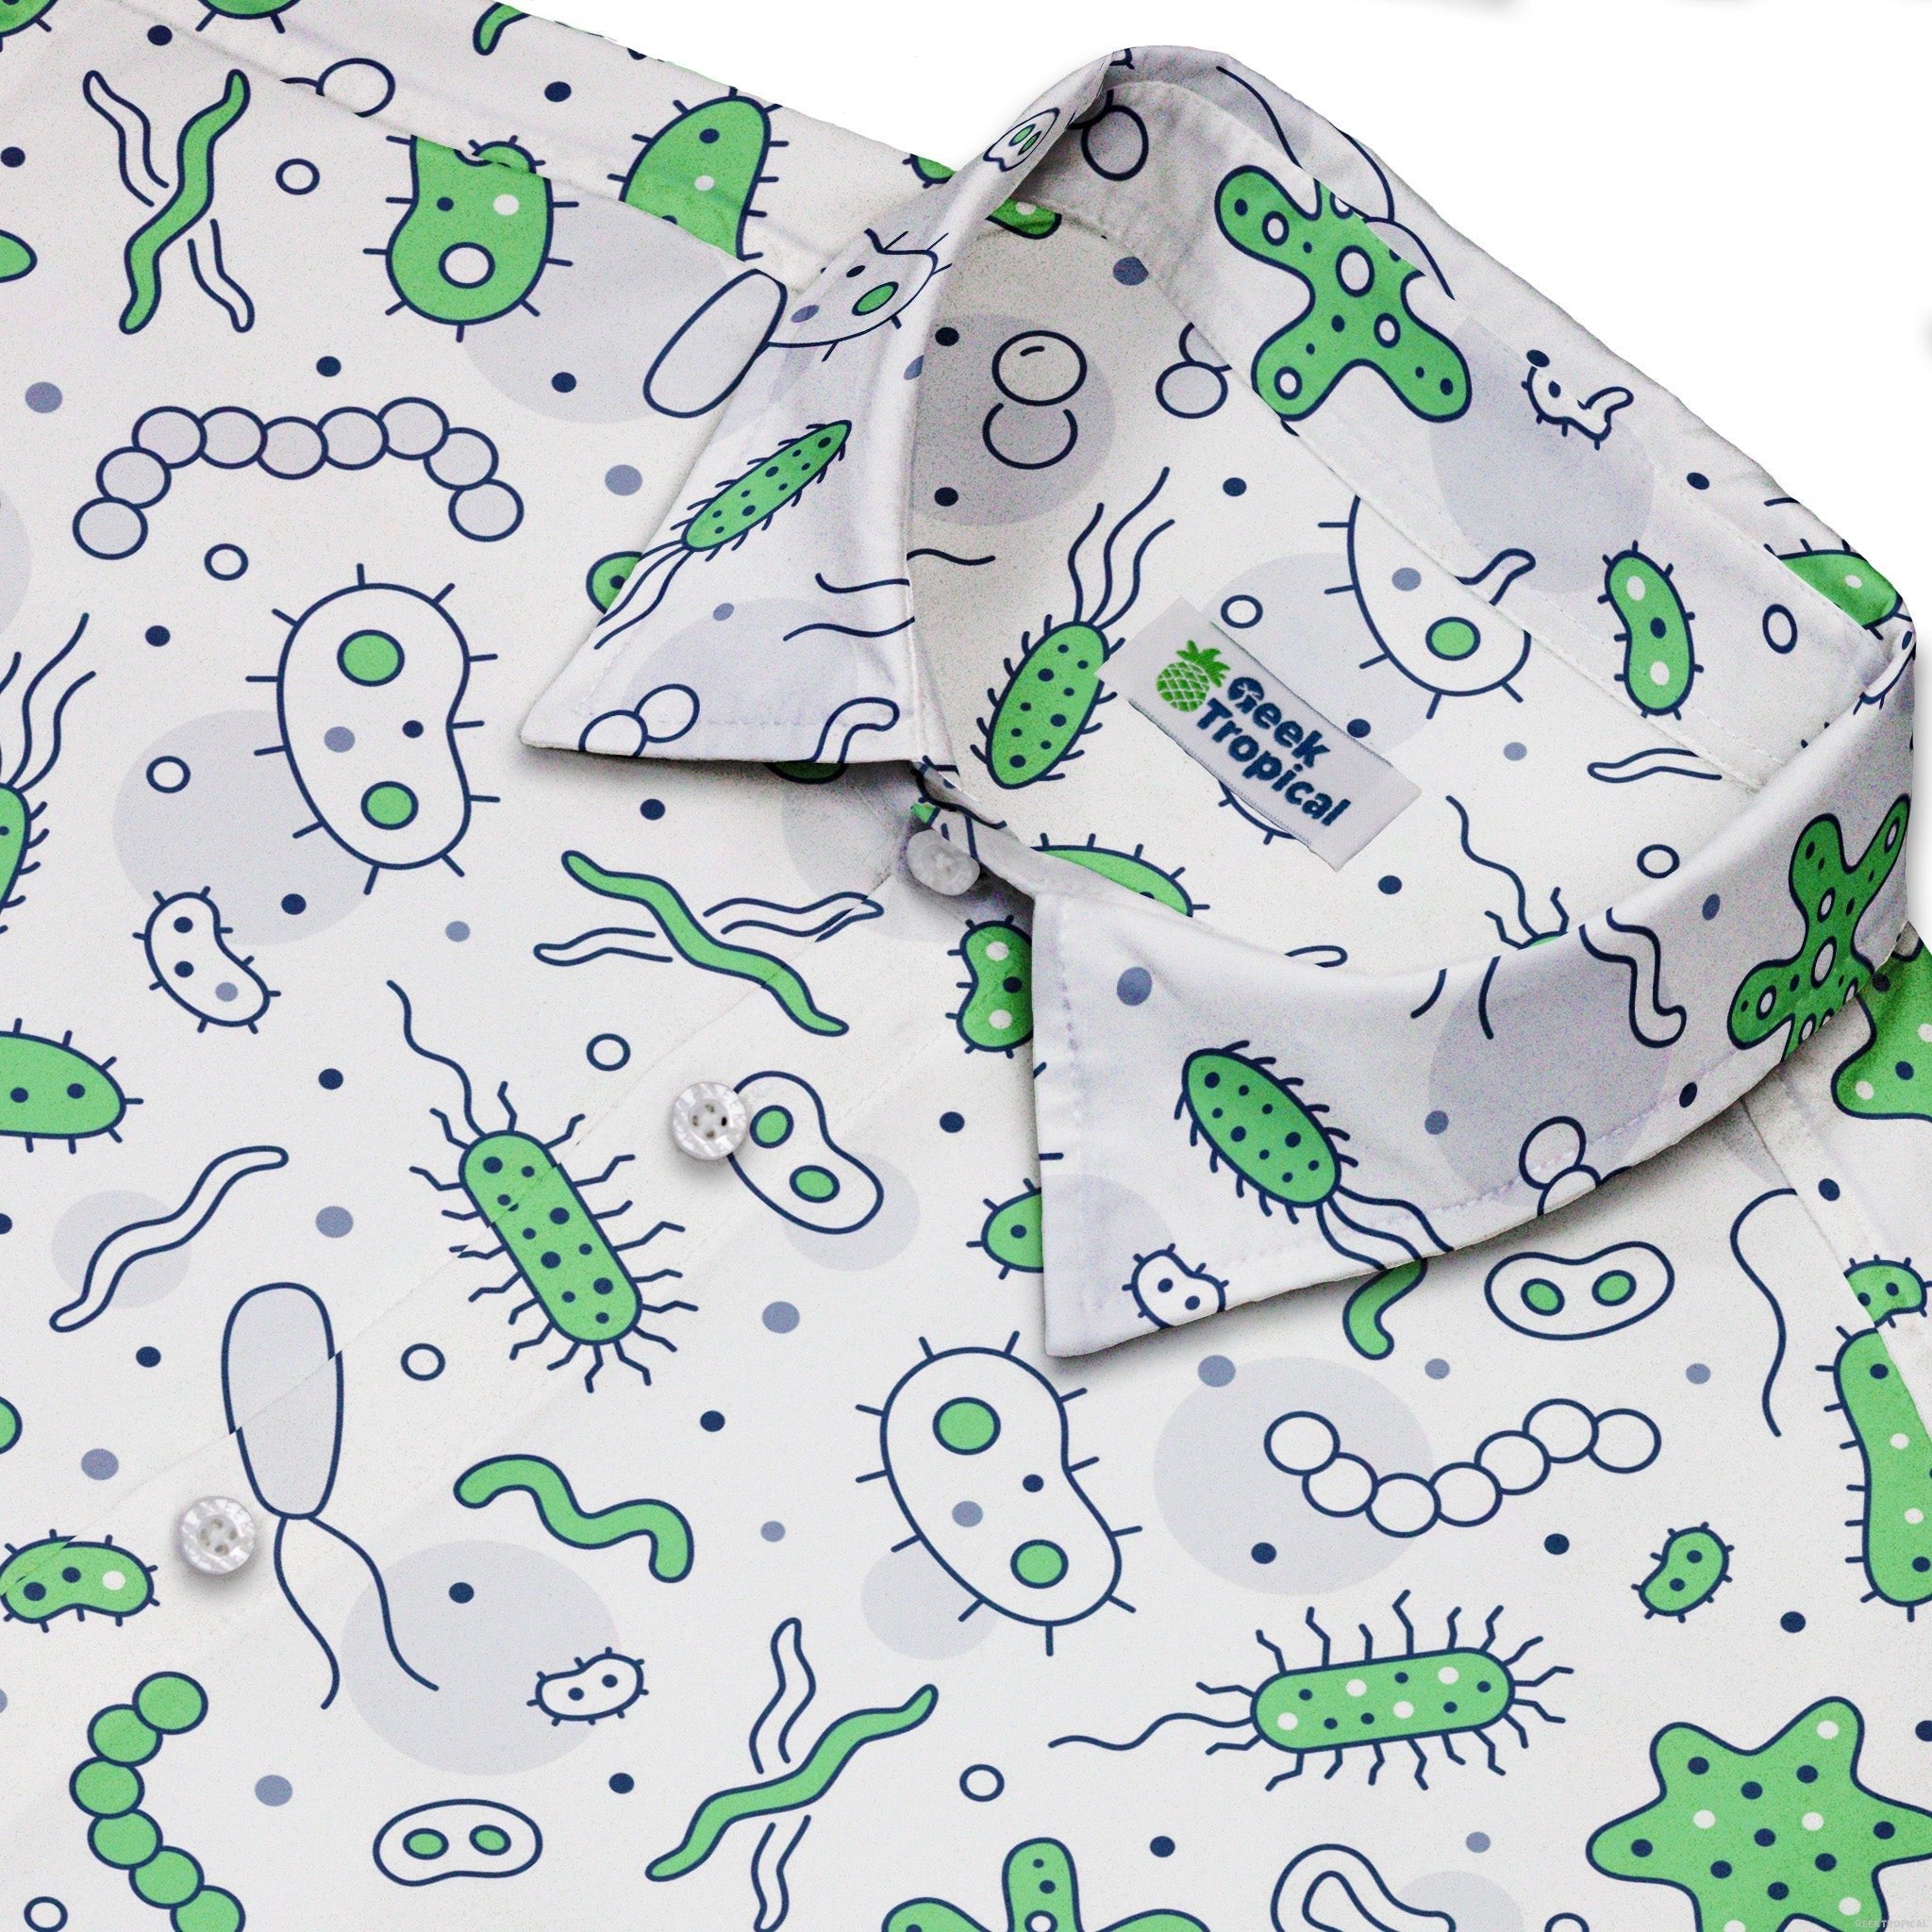 Science Green Microbes White Button Up Shirt - adult sizing - science print -